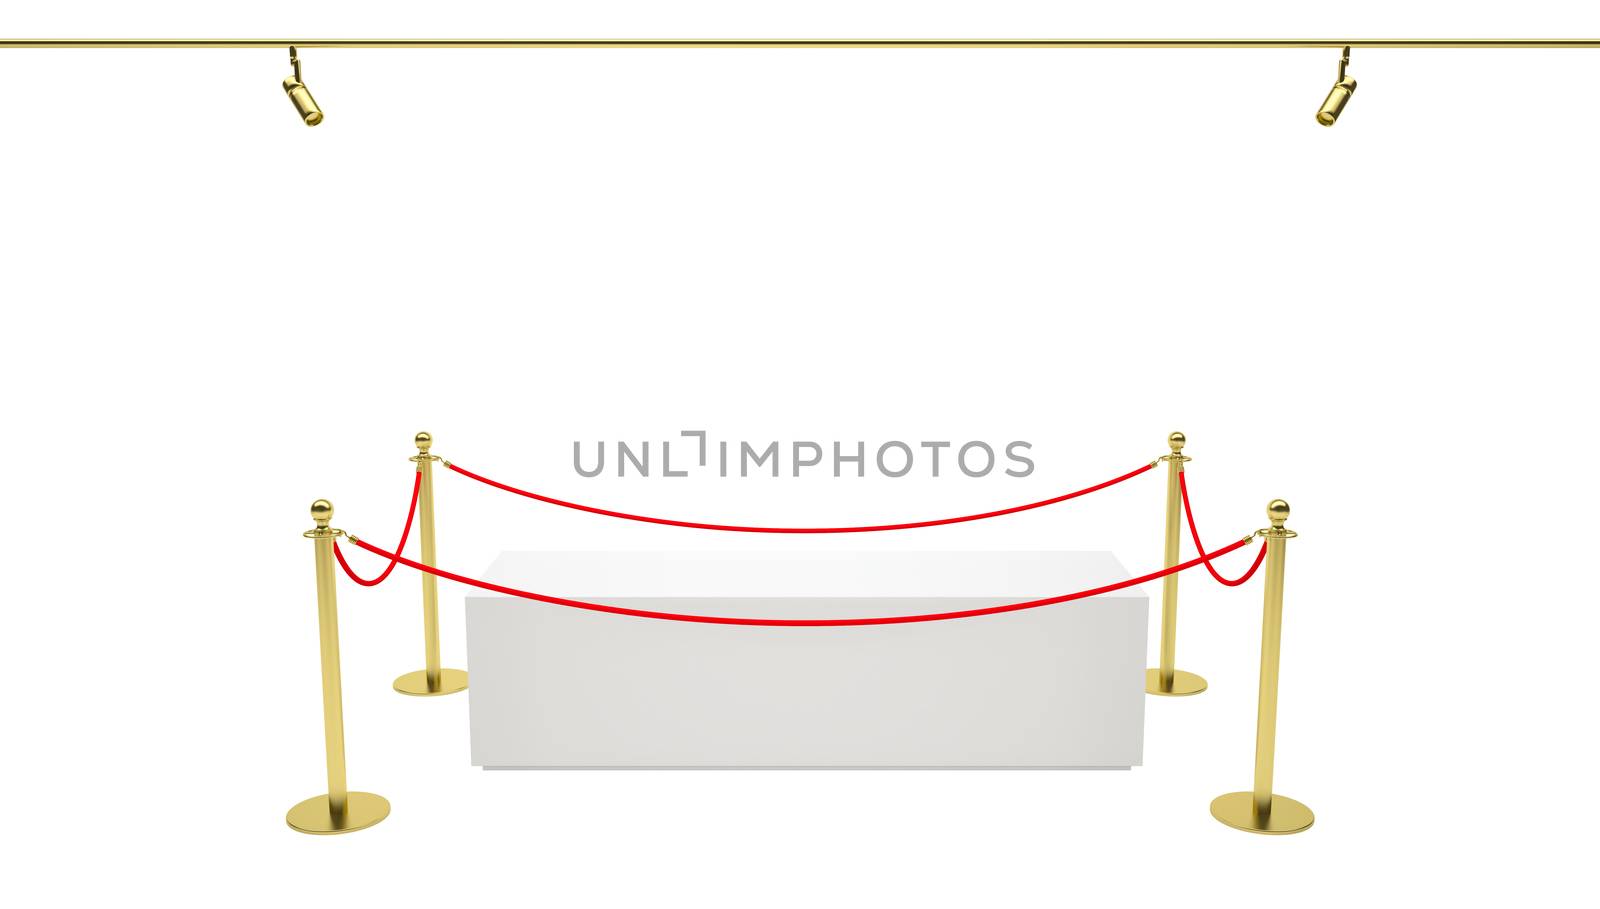 Empty showcase with tiled stand barriers for exhibit. Isolated white background. 3D illustration